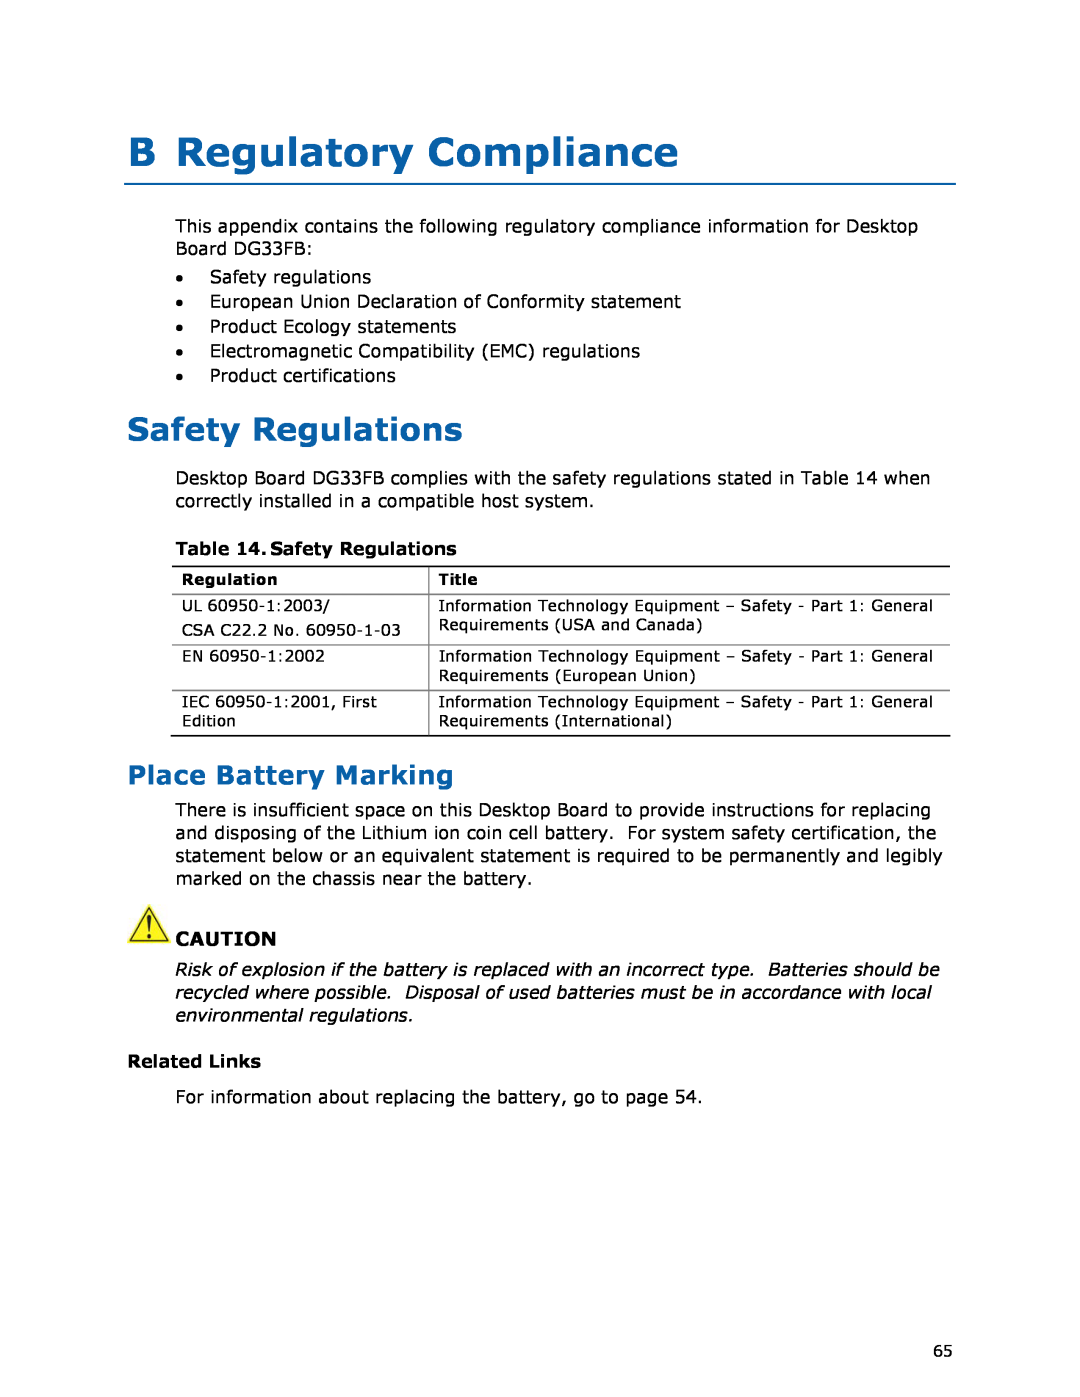 Intel DG33FB manual B Regulatory Compliance, Safety Regulations, Place Battery Marking, Related Links 